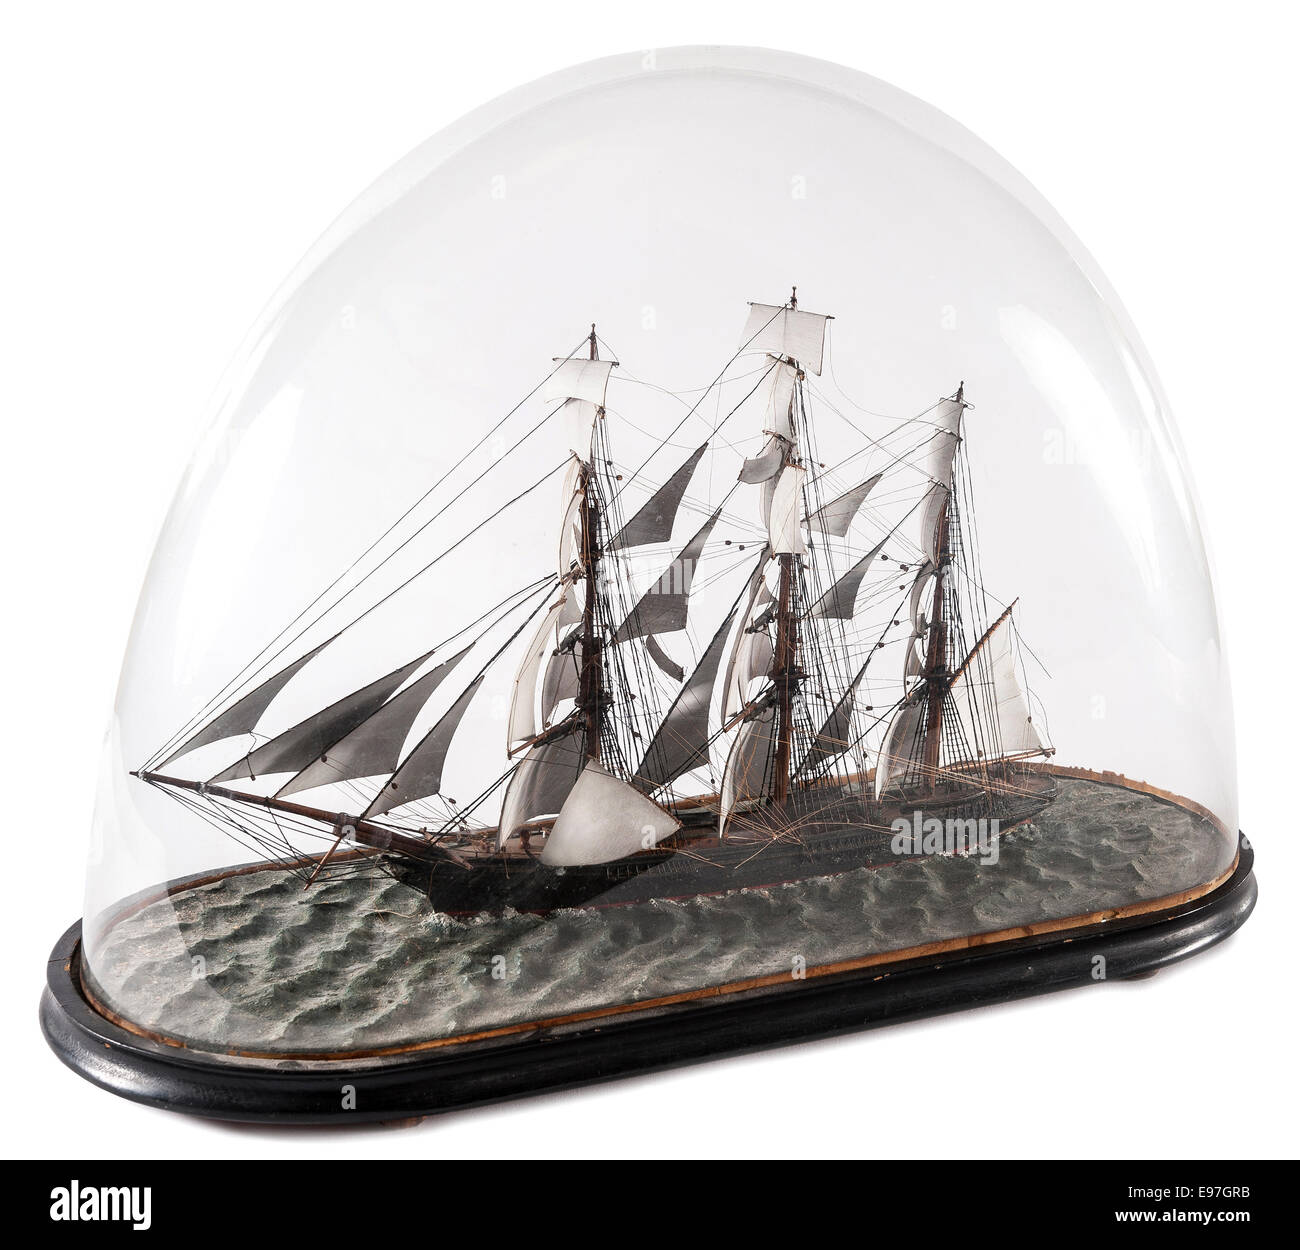 Model of a three masted sailing ship in glass domed case Stock Photo